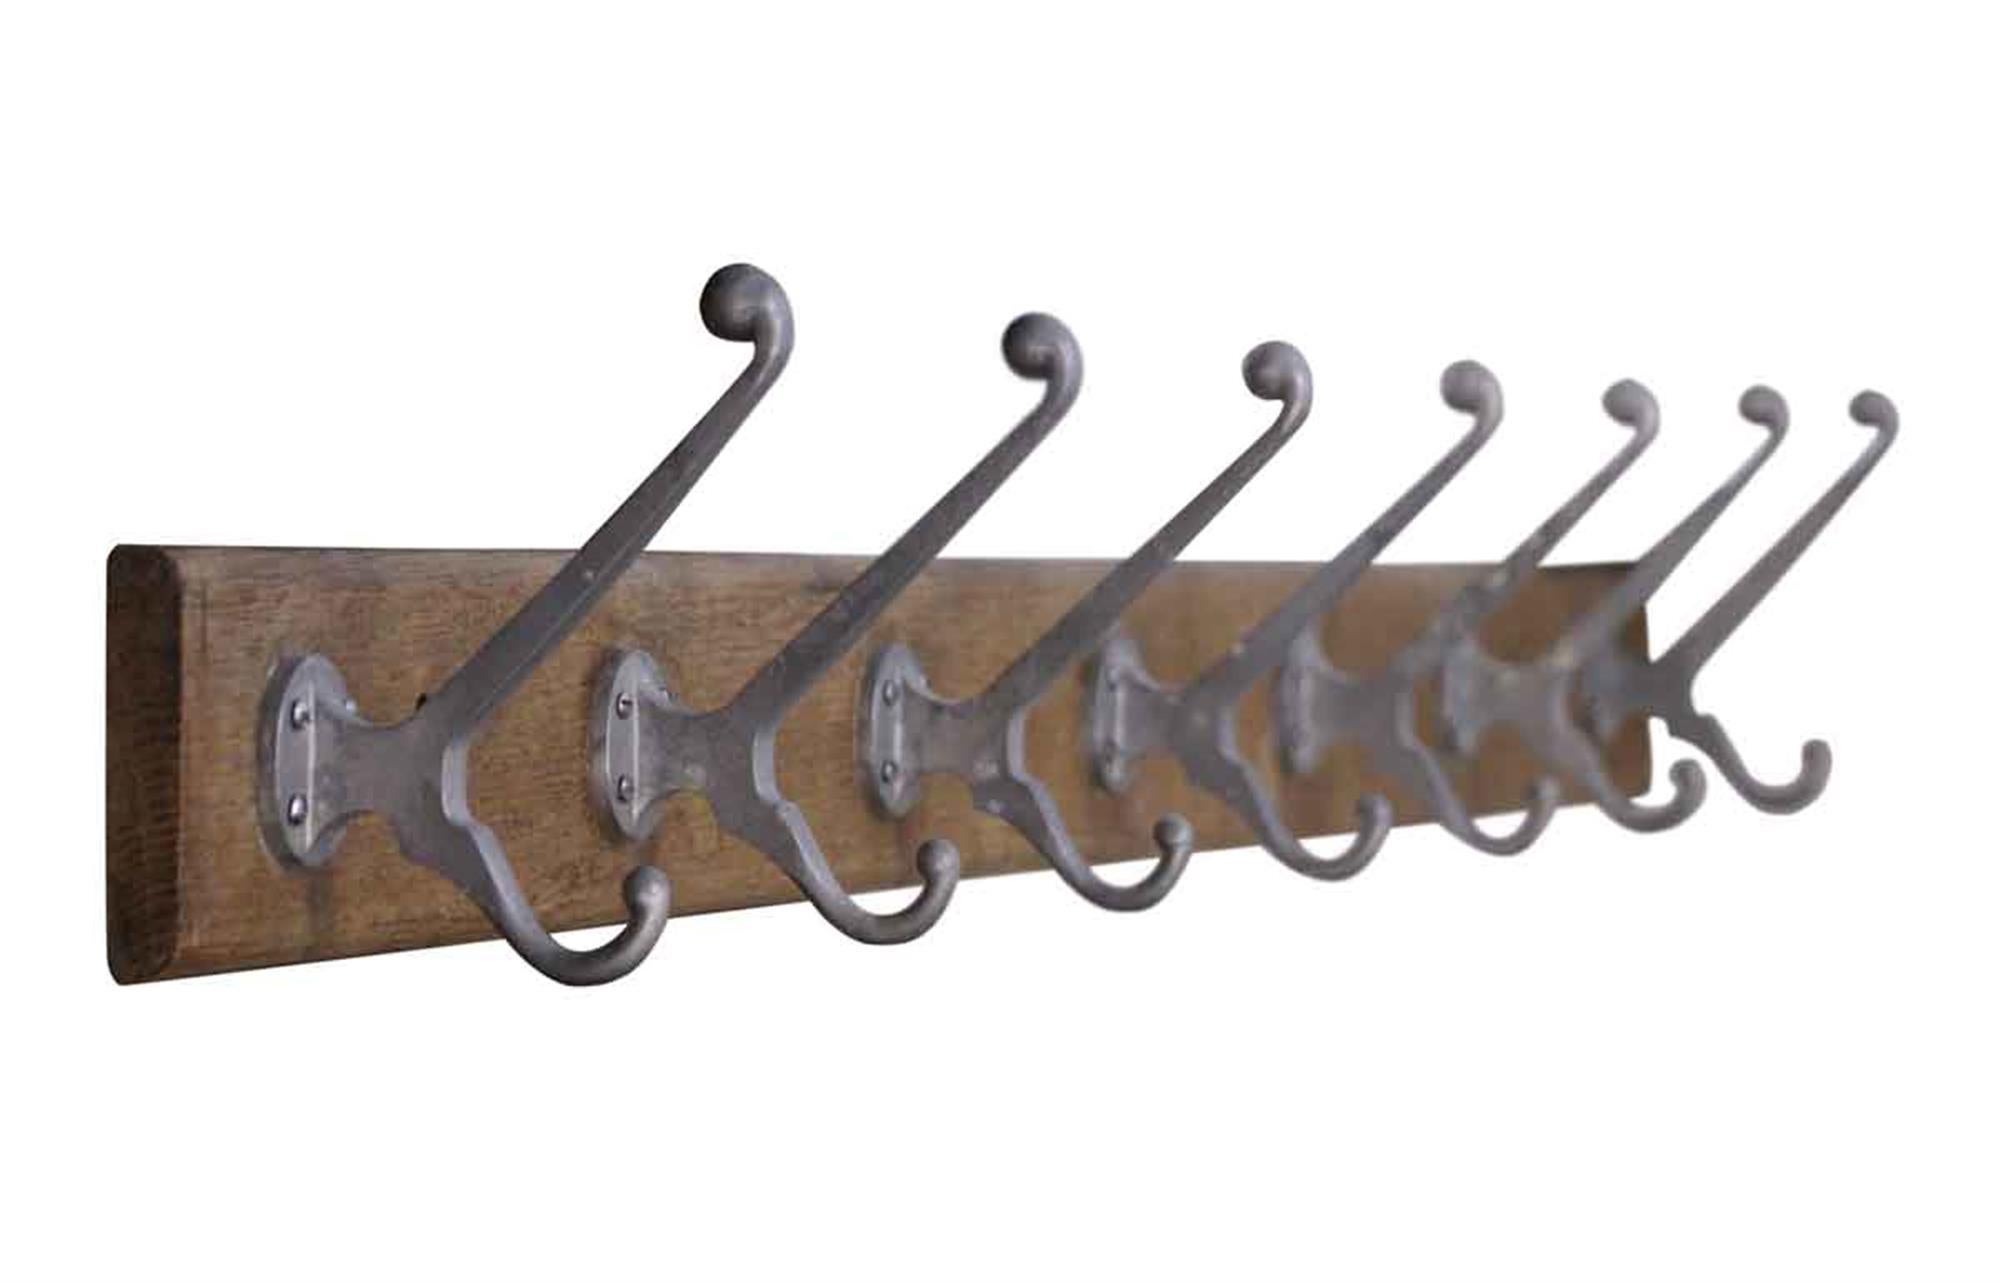 Industrial 1990s Belgium Wall Mounted Coat Rack with Seven Hooks on a Wooden Plank